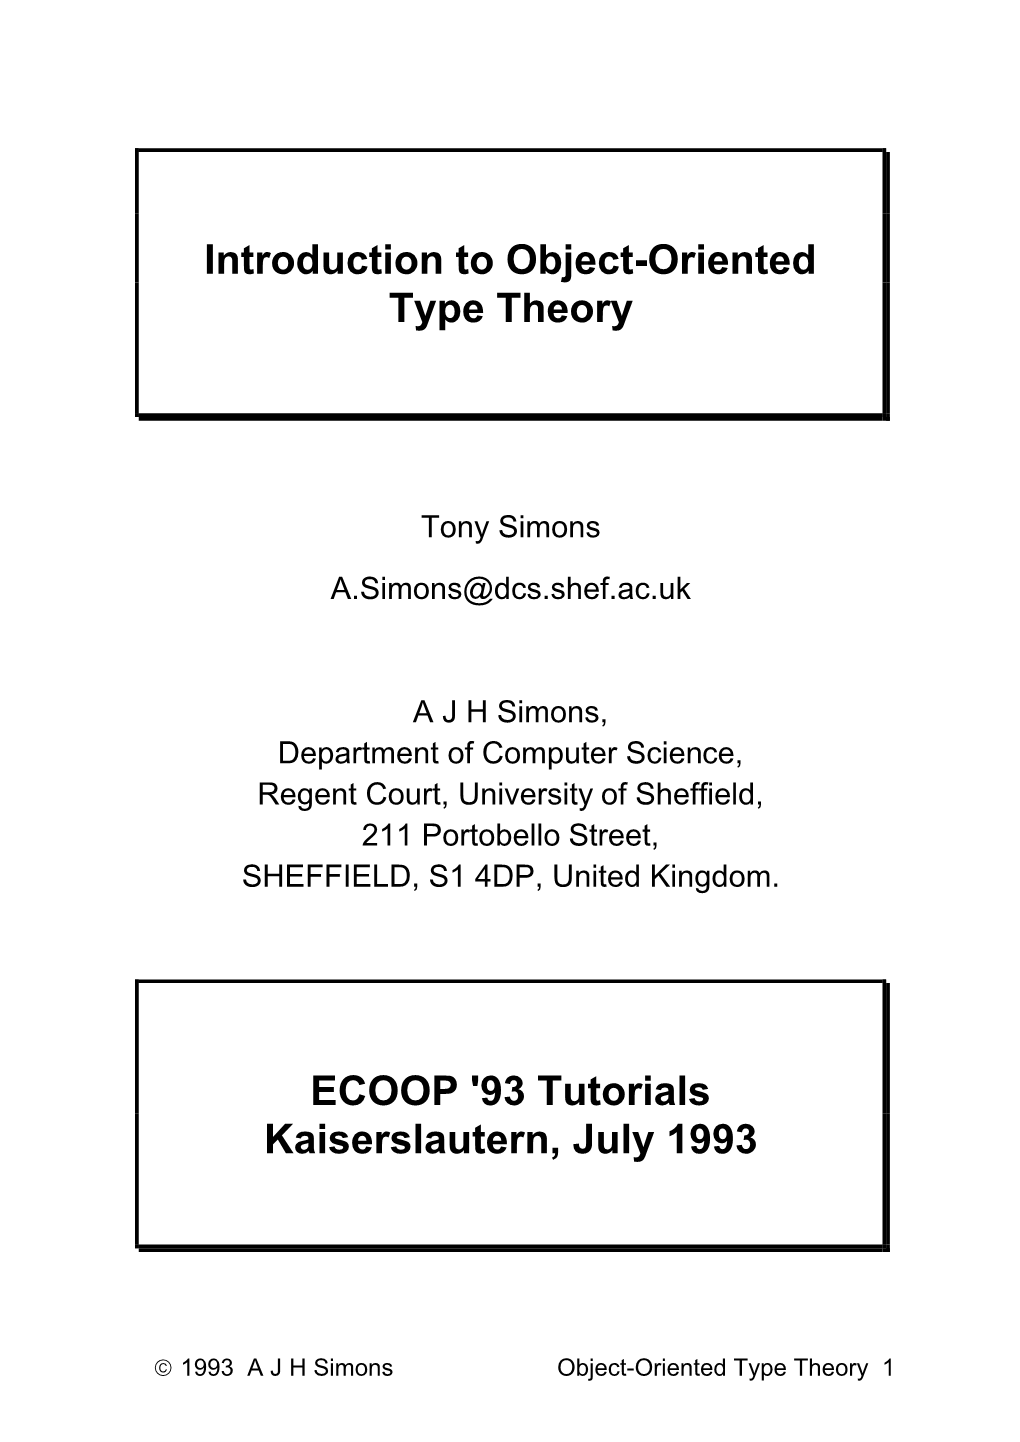 Introduction to Object-Oriented Type Theory ECOOP